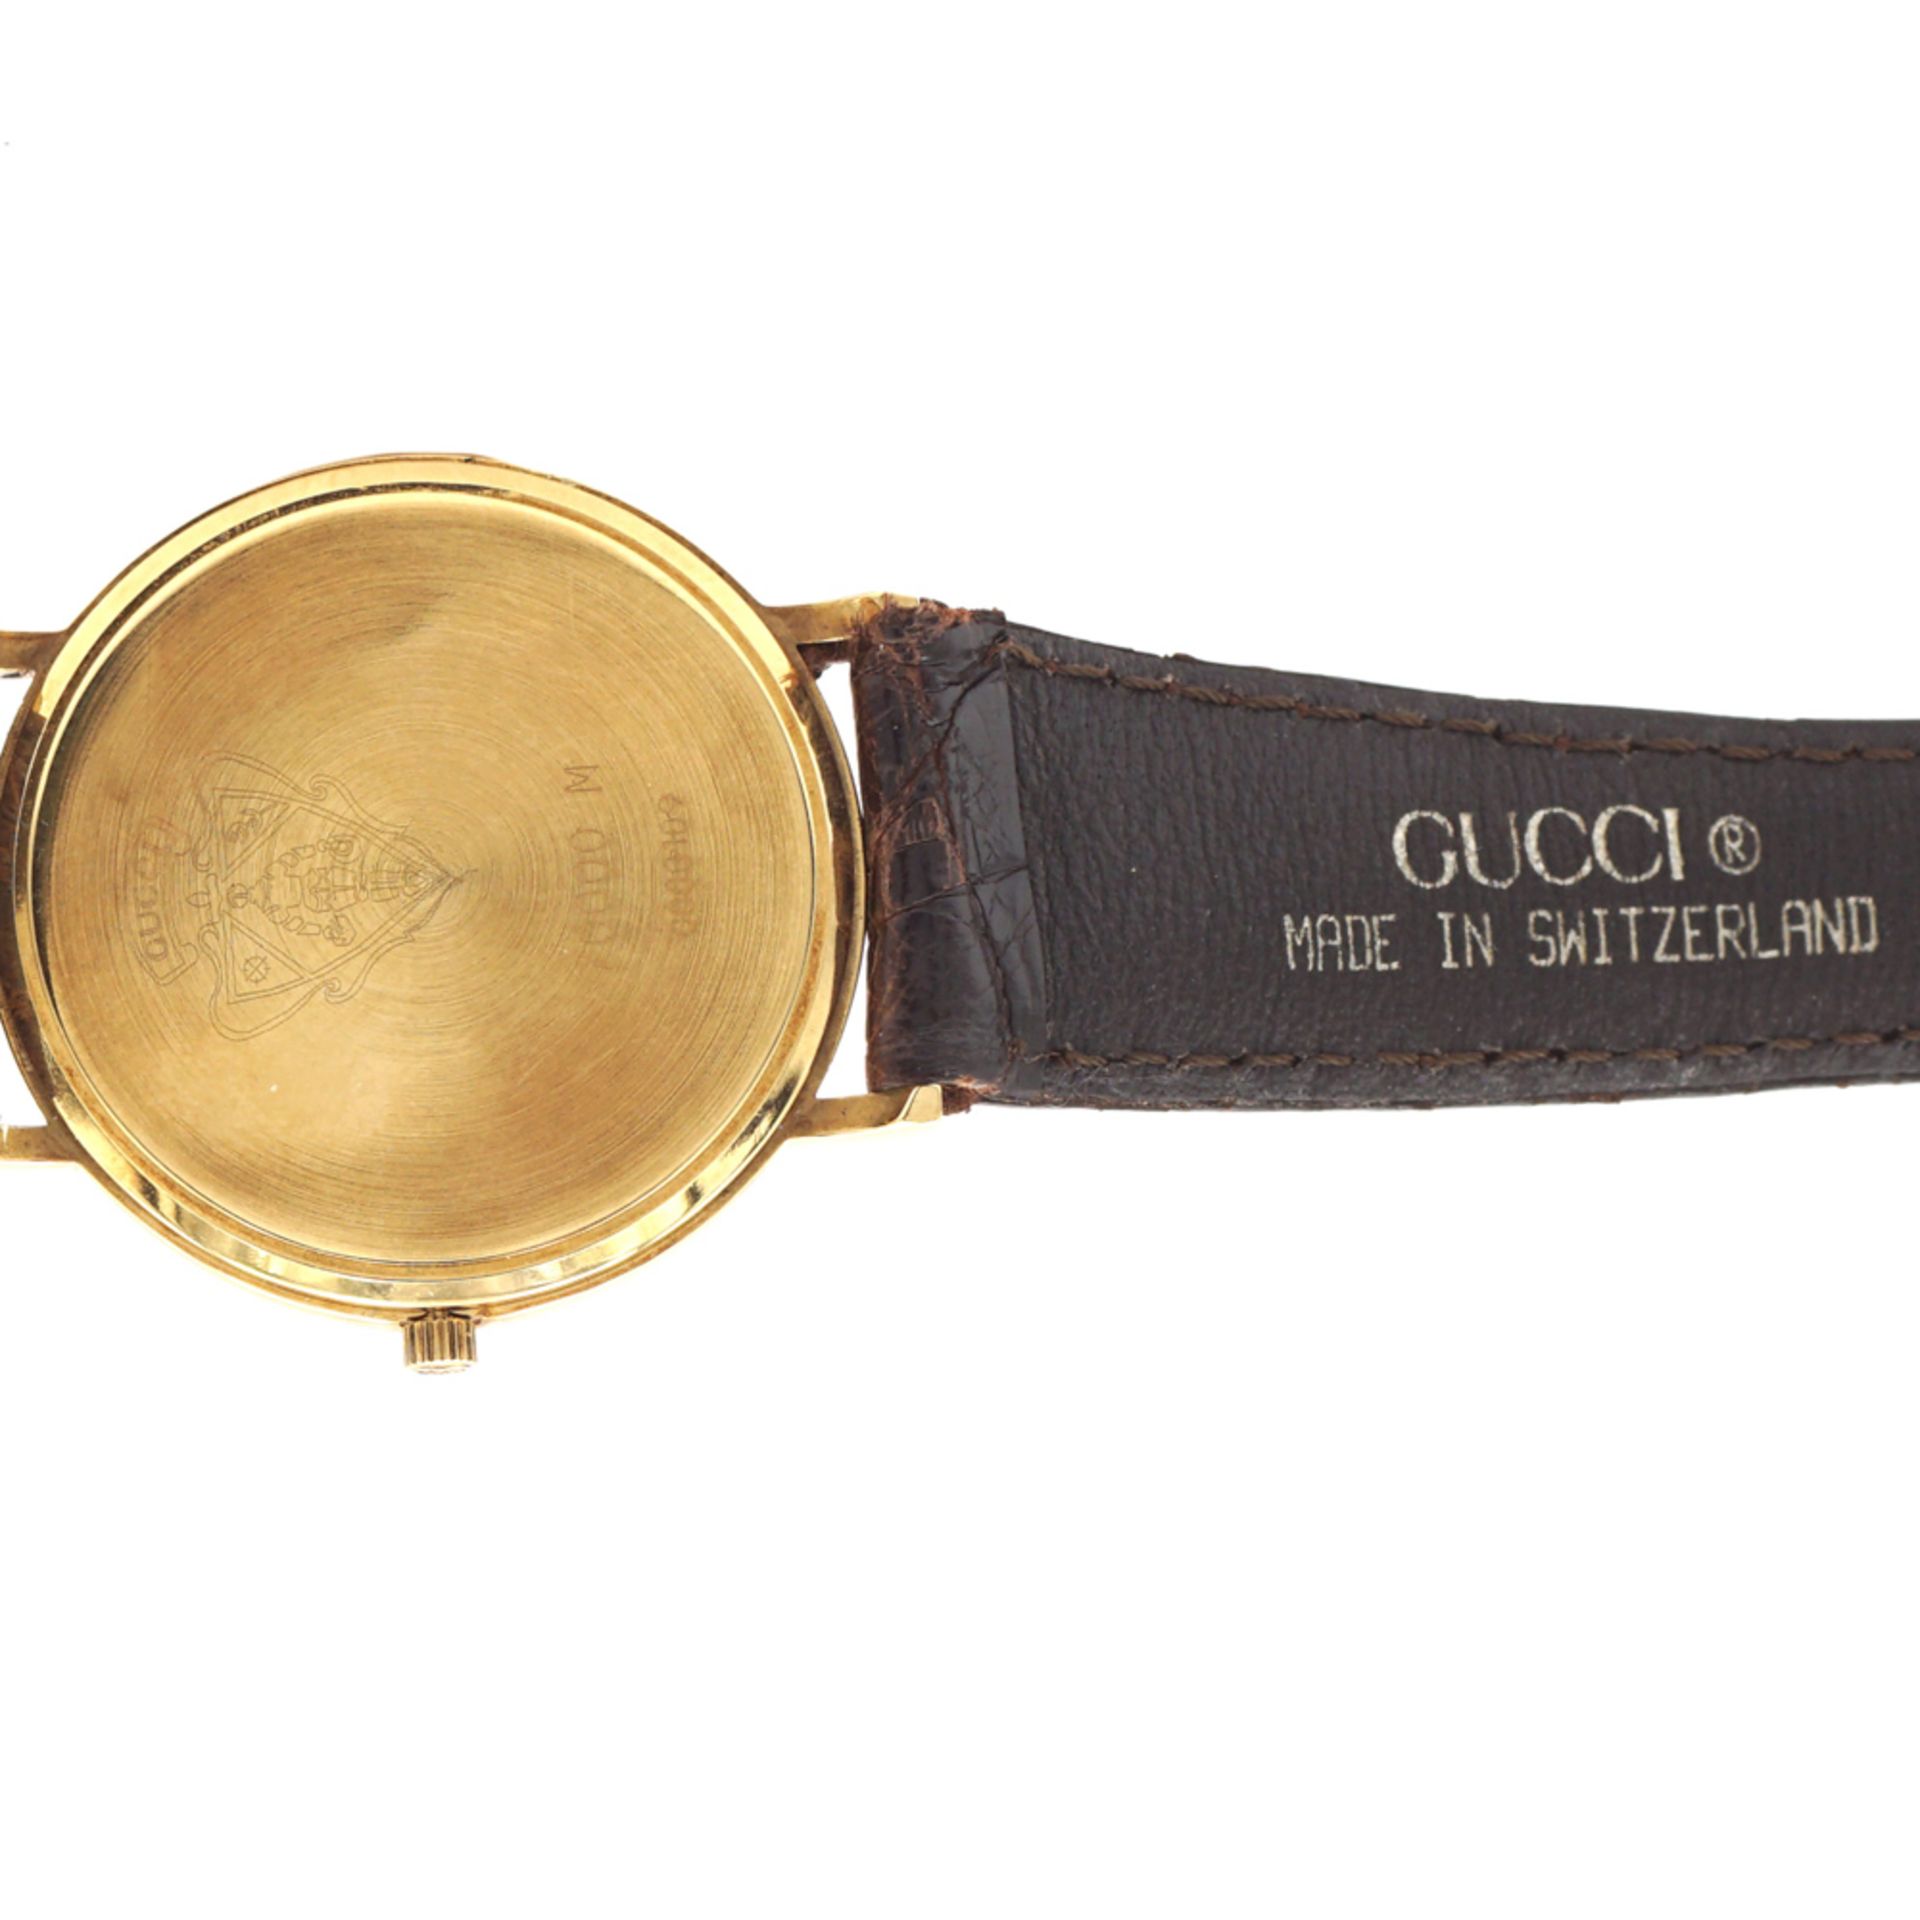 Gucci, Crest collection wrist watch weight 25,3 gr. - Image 4 of 5